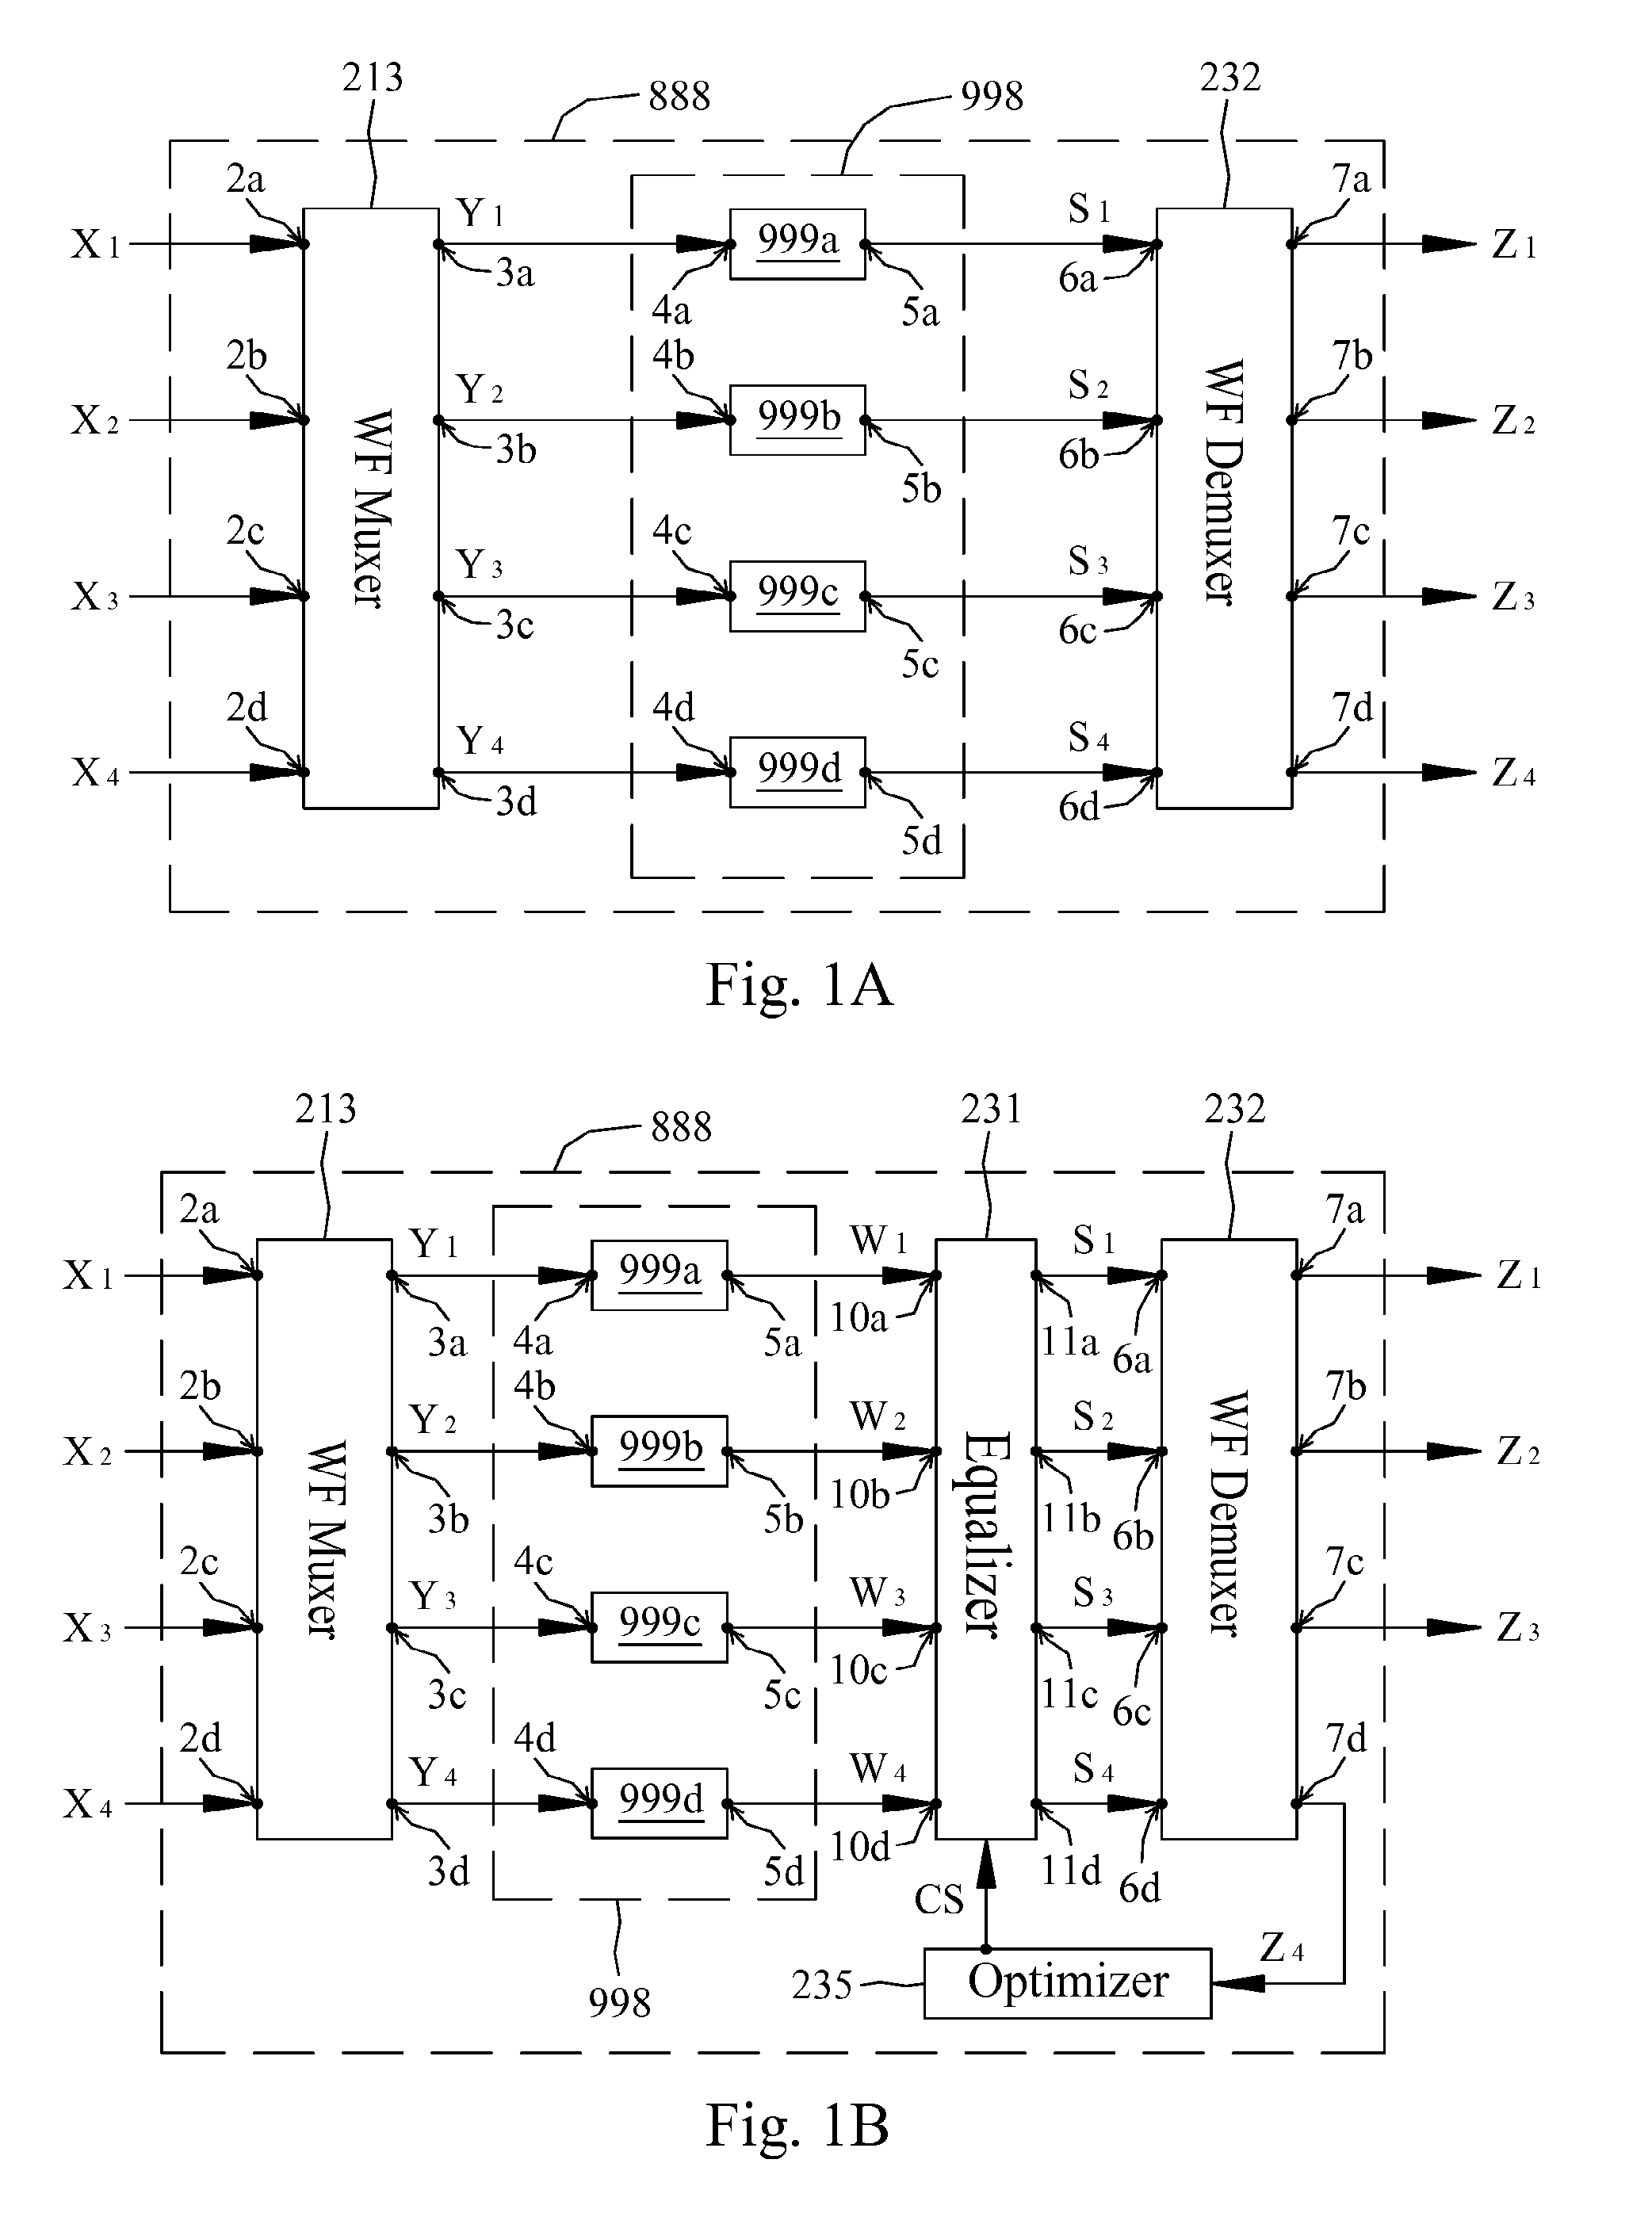 System for processing data streams